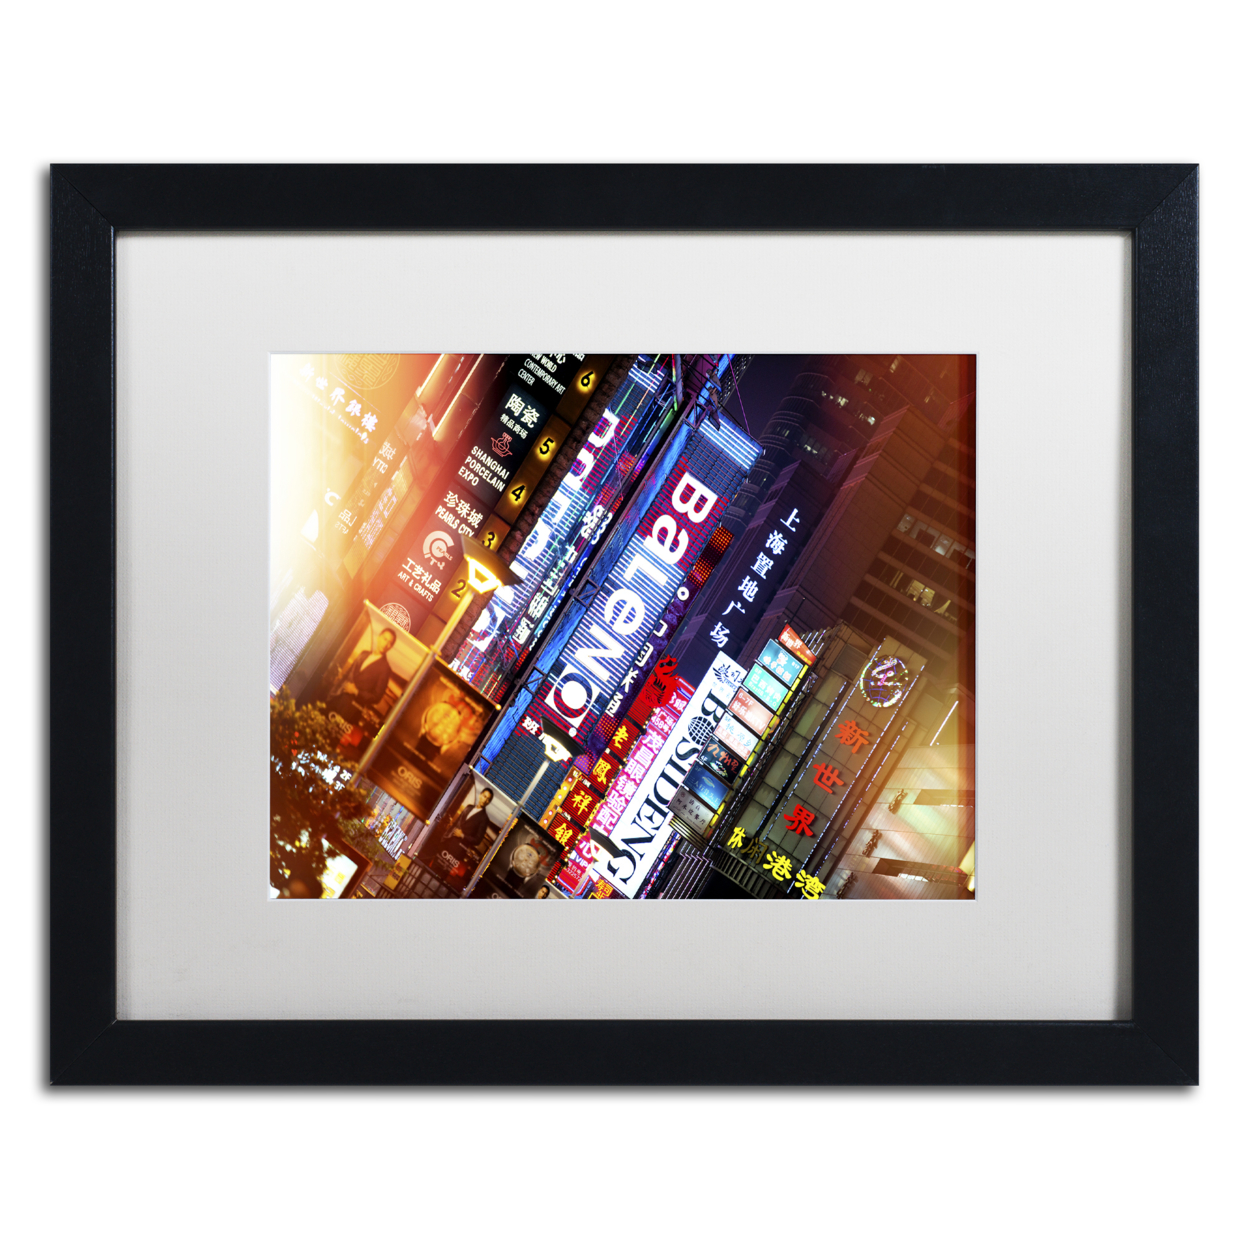 Philippe Hugonnard 'Neon Signs' Black Wooden Framed Art 18 X 22 Inches